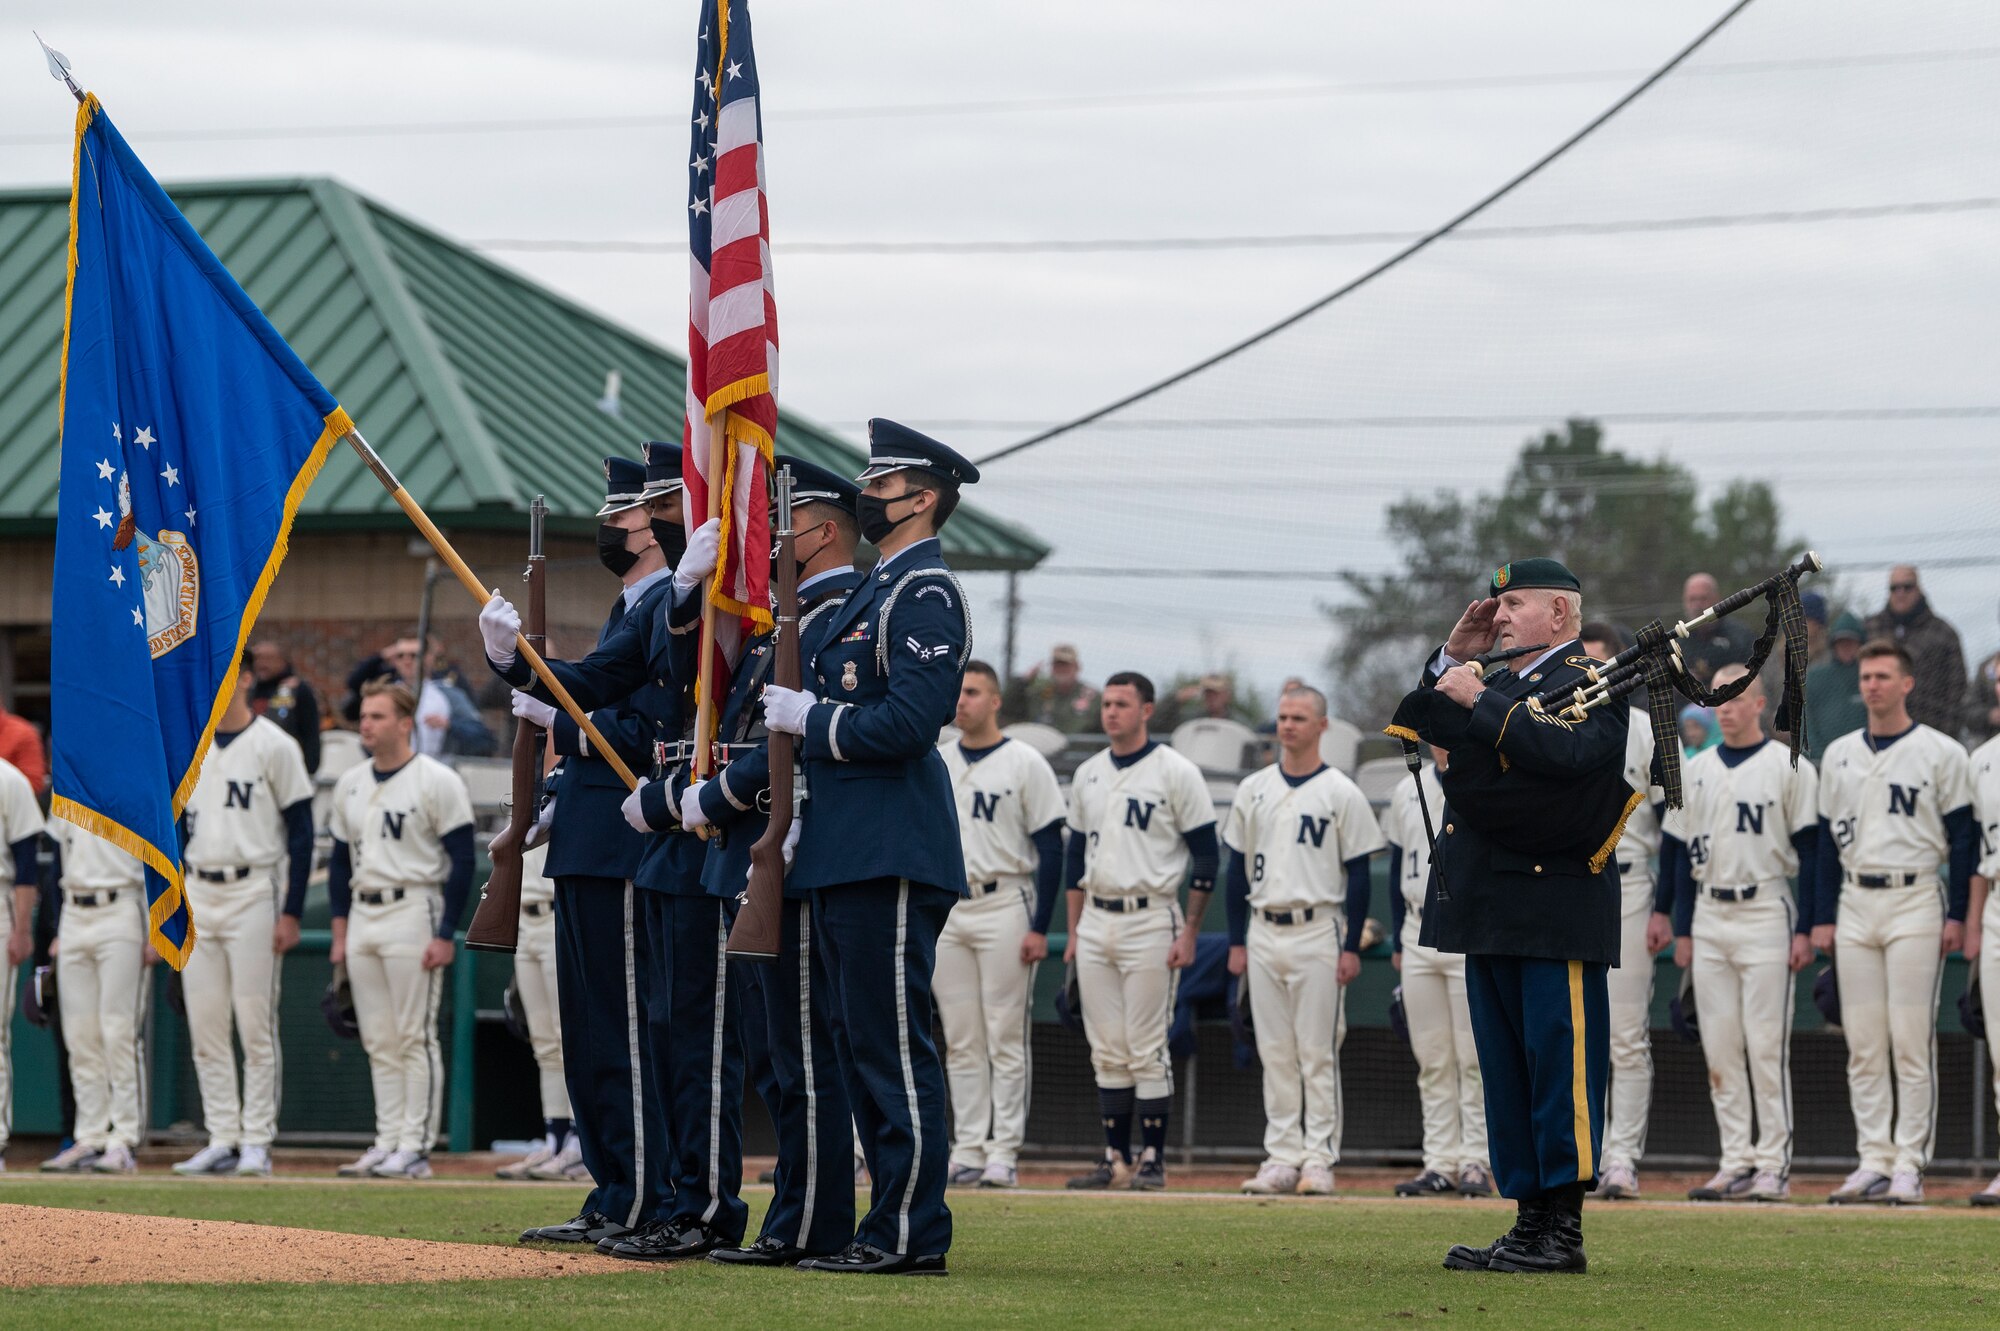 Airmen from the 4th Fighter Wing Honor Guard salute during the singing of the National Anthem at the 12th Annual Freedom Classic baseball series at Grainger Stadium in Kinston, North Carolina on Feb. 26, 2022. The Naval Academy won the series 2-1 over the Air Force Academy. (U.S. Air Force photo by Airman 1st Class Kevin Holloway)